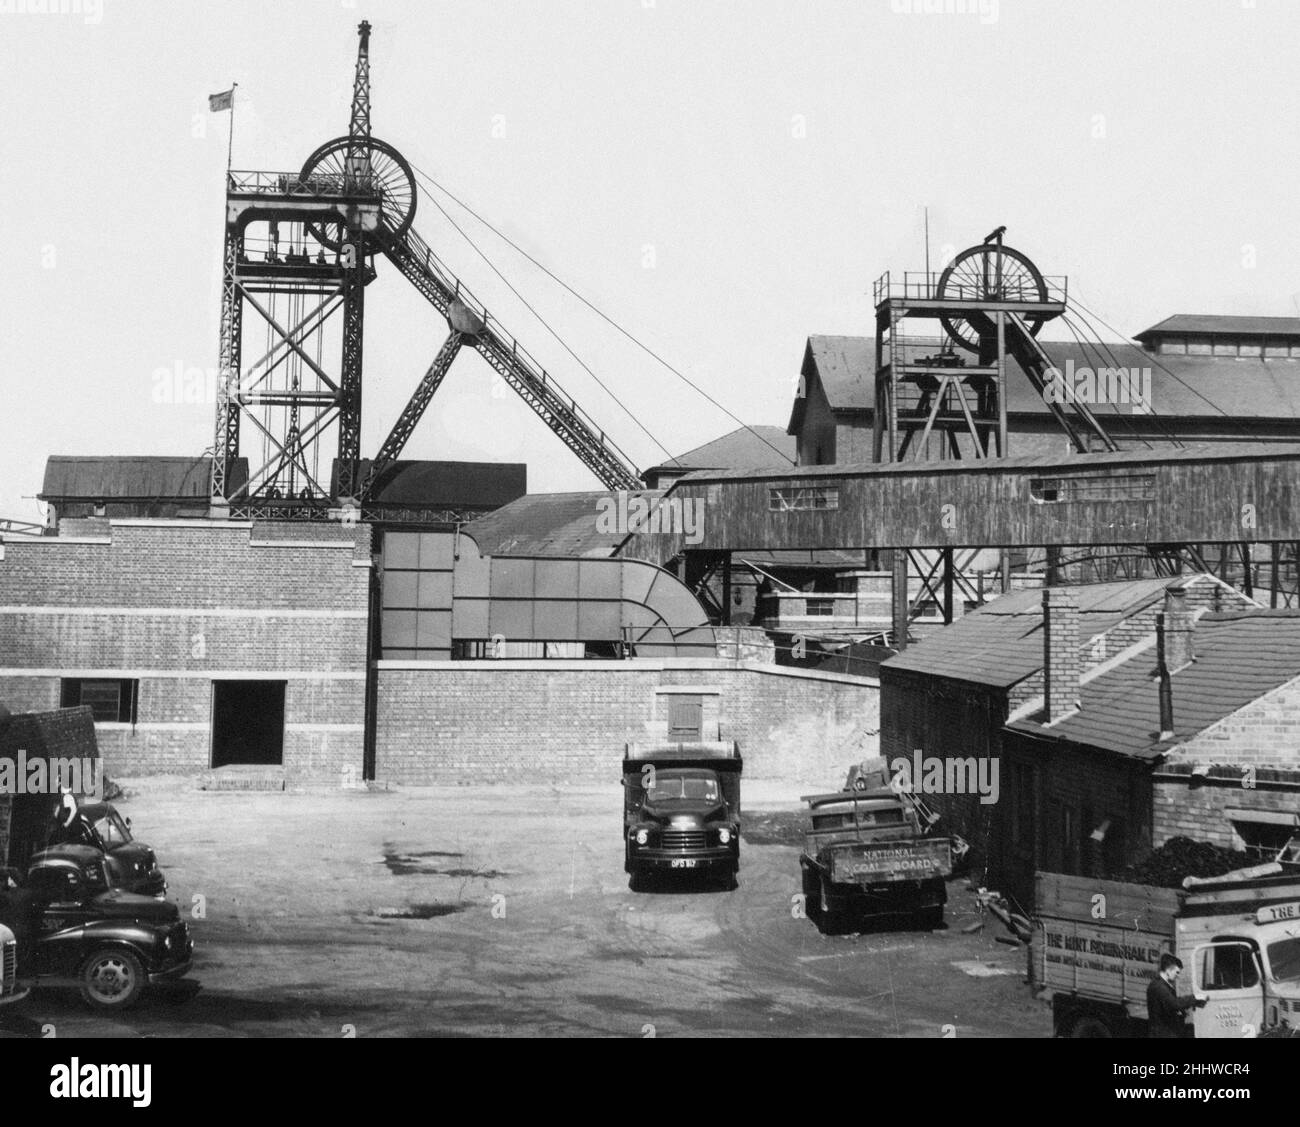 The Hamstead Colliery Fire of 4th March 1908, killed 26 men in one day. When a fire broke out there were 31 miners in the pit, 6 escaped before poisonous fumes built up in the roadways. Rescue teams made many attempts to reach the entombed men. On 11 March, 14 bodies were recovered, and 6 more were recovered the following day. One of the victims was a member of the rescue team from Altofts, John Welsby. Pictured, Hamstead Colliery, with new electrical ventilation fan (centre) 15th July 1955. Stock Photo